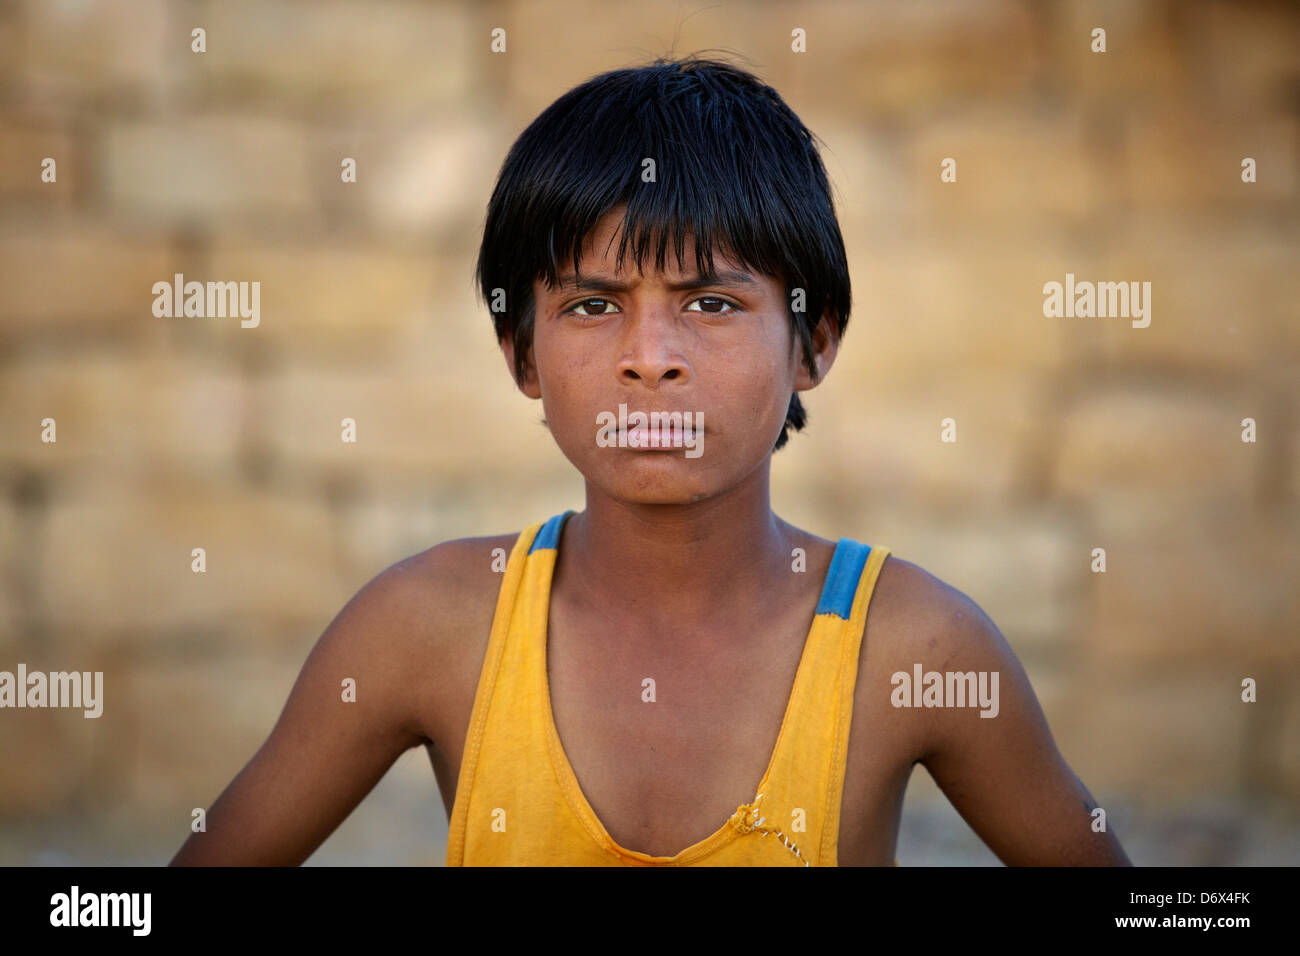 Portrait of india young boy child, Jaisalmer, state of Rajasthan, India Stock Photo